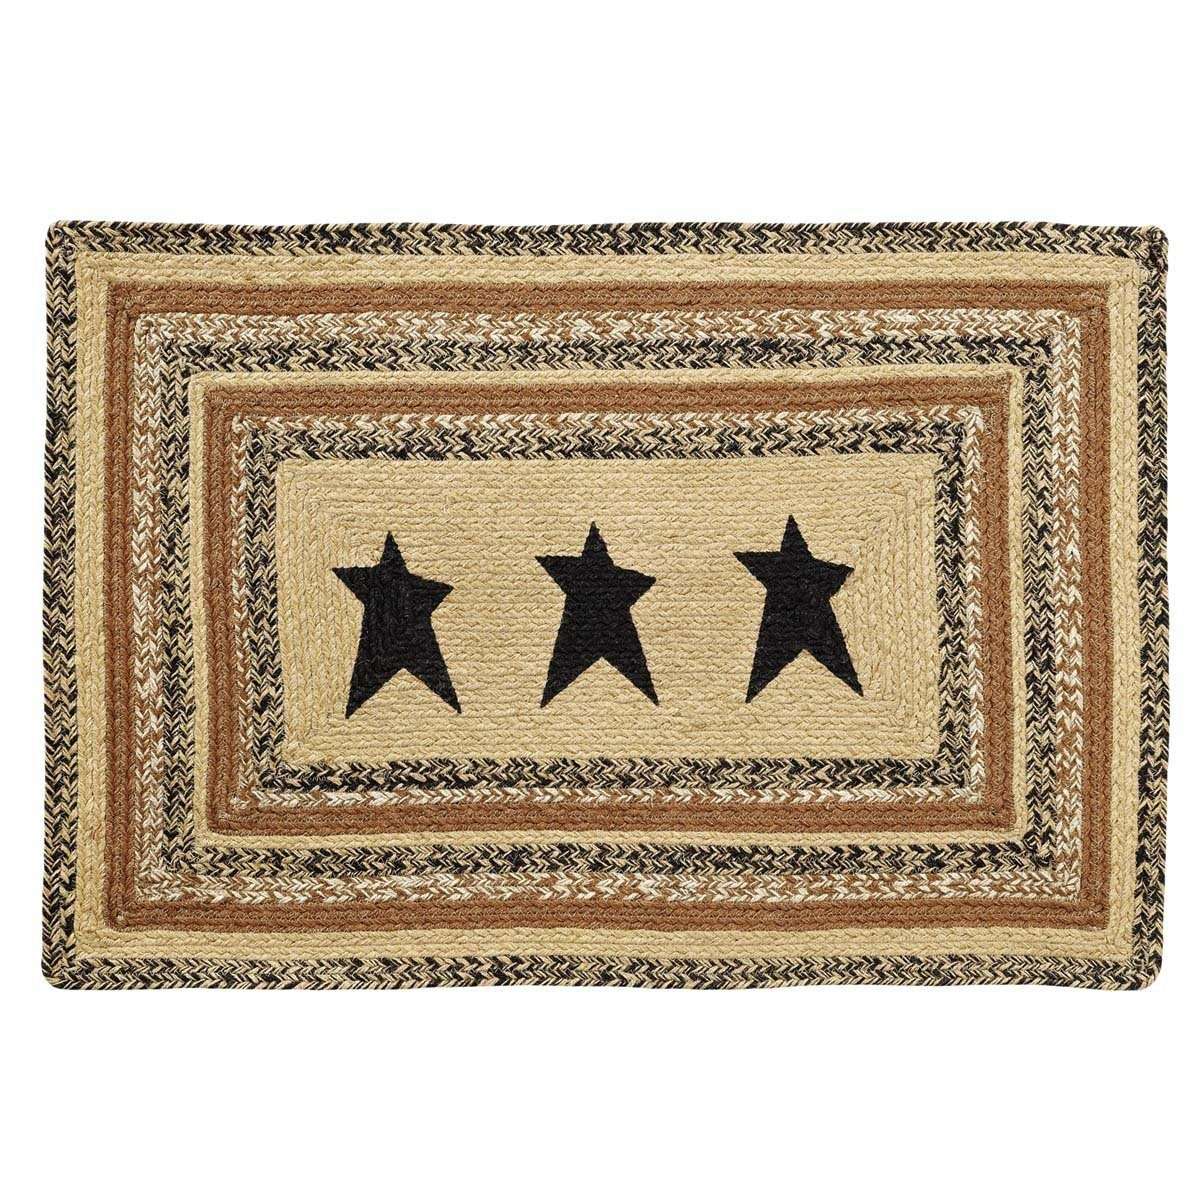 Kettle Grove Jute Braided Rectangle Stencil Star VHC Brands Rugs VHC Brands 24" x 36" 